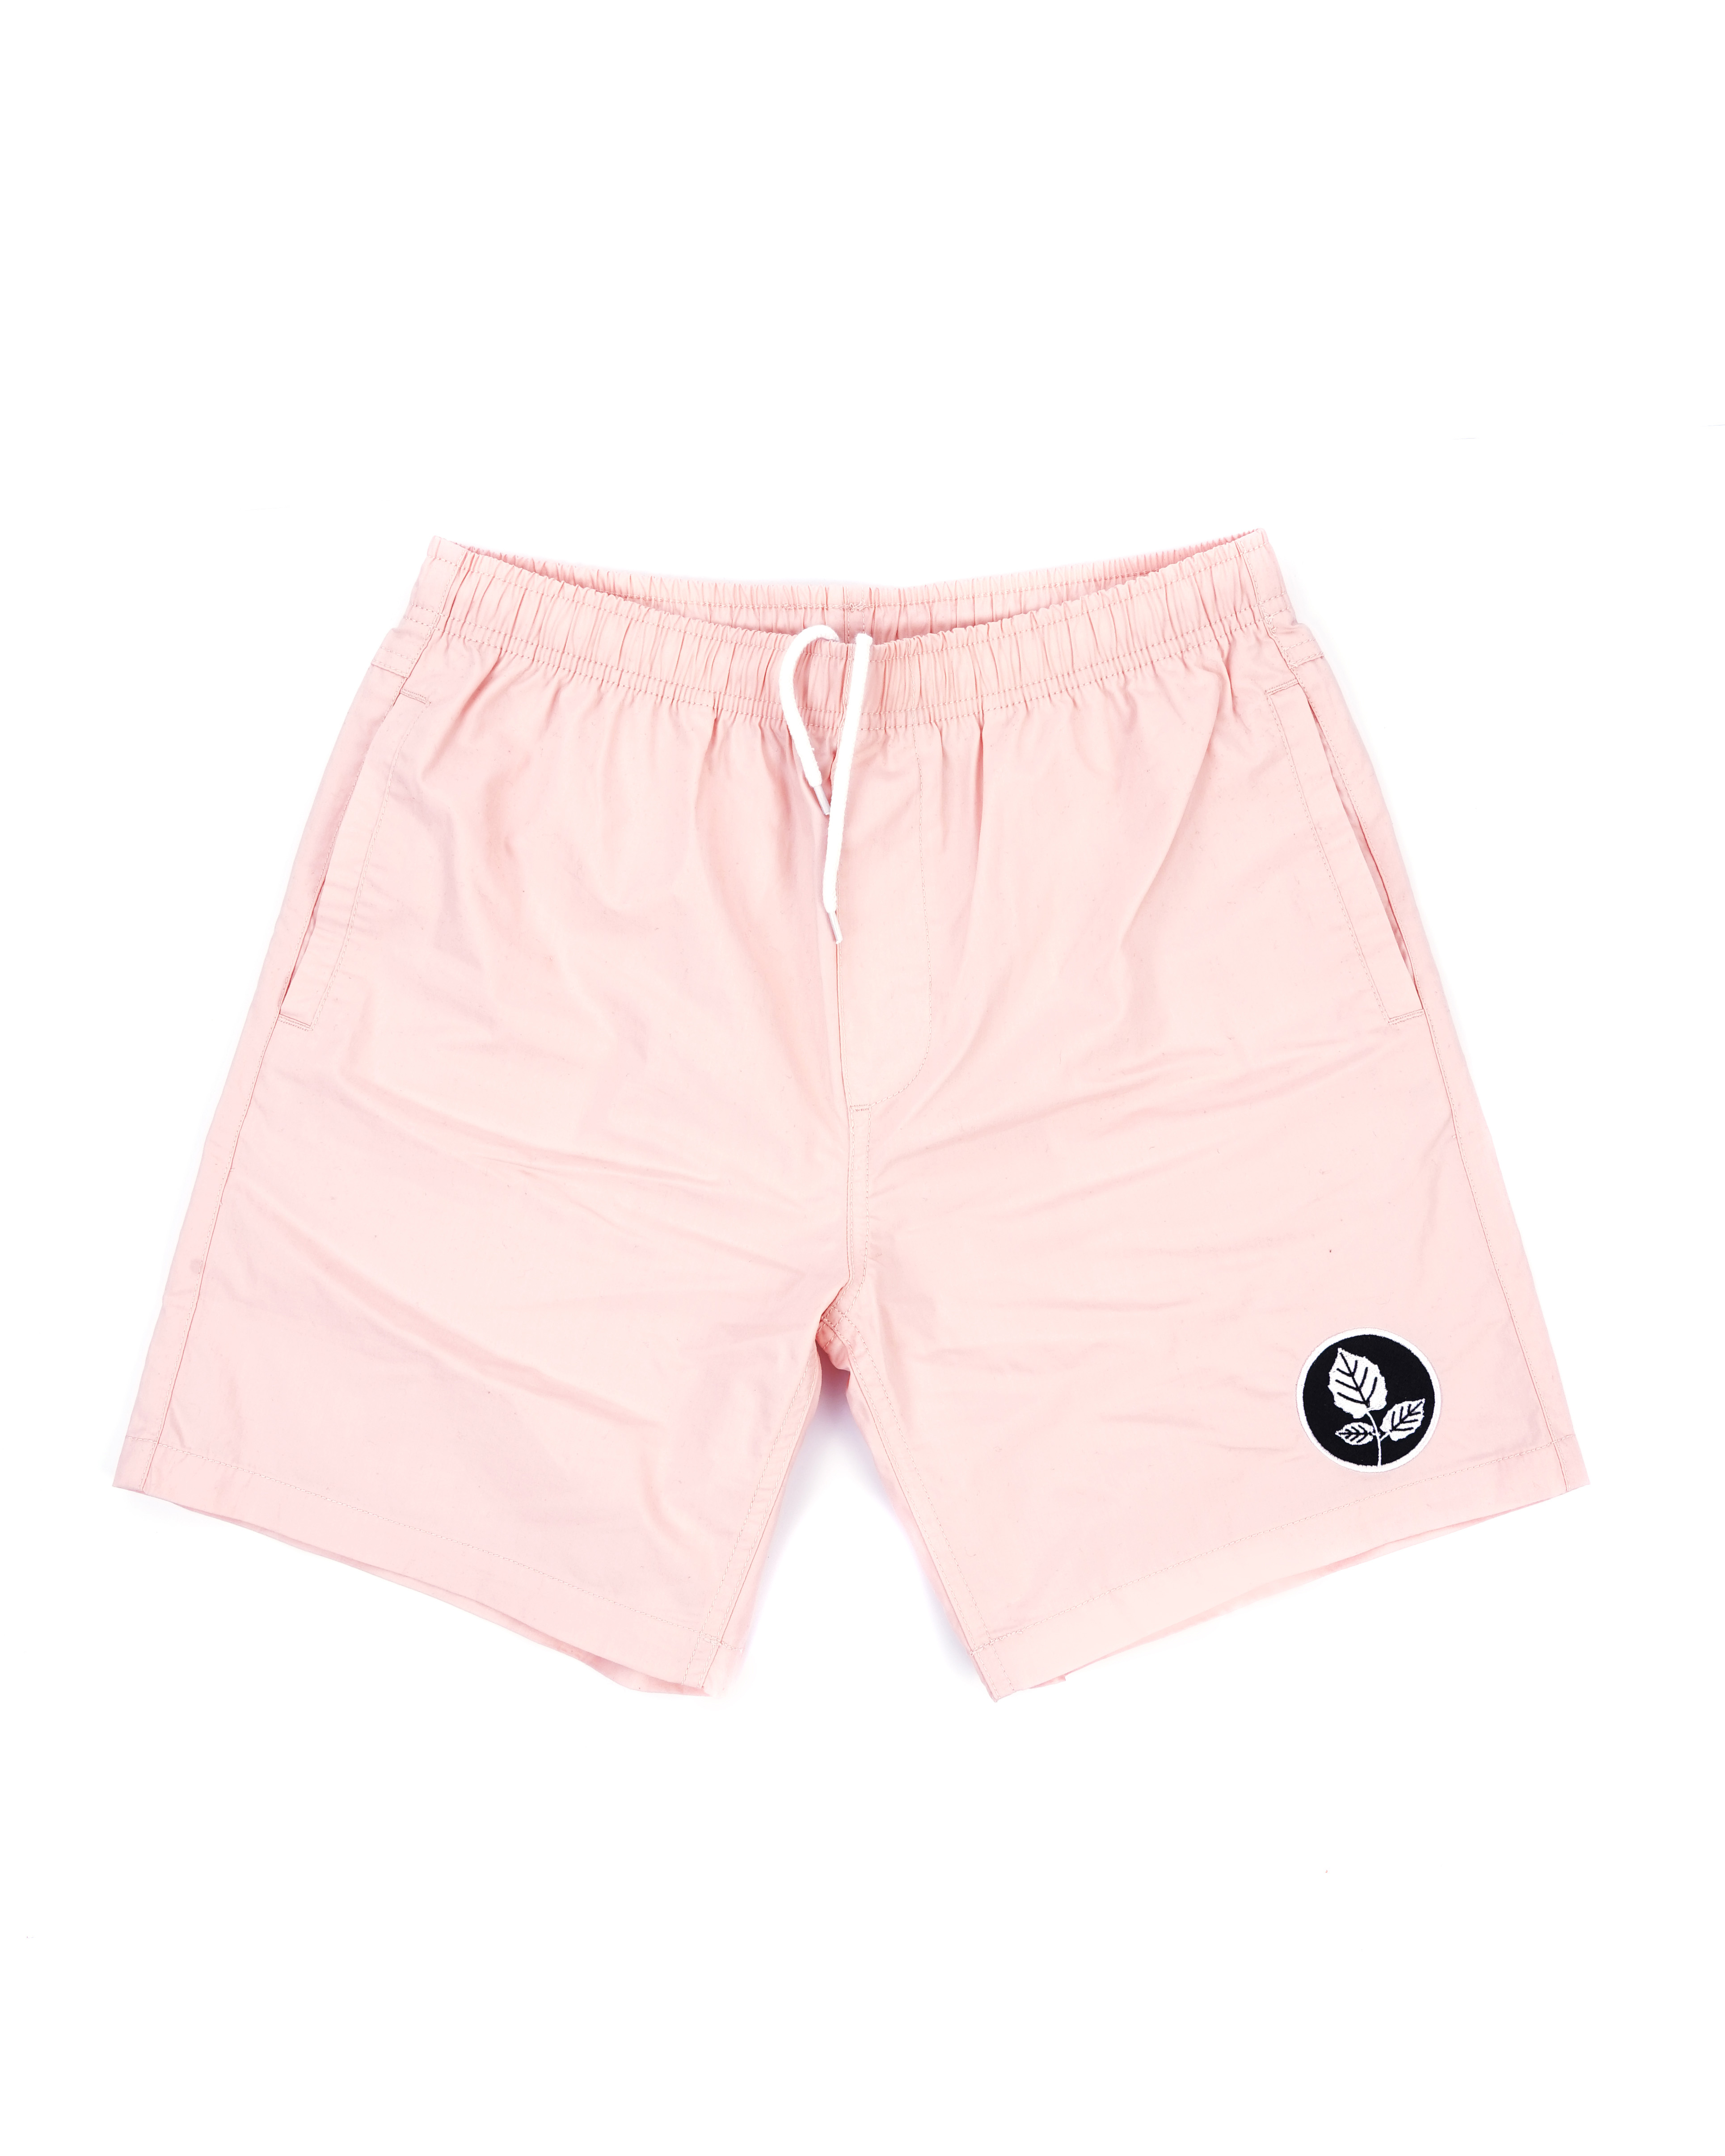 Tour Shorts // Pink - Hole Hearted Clothing